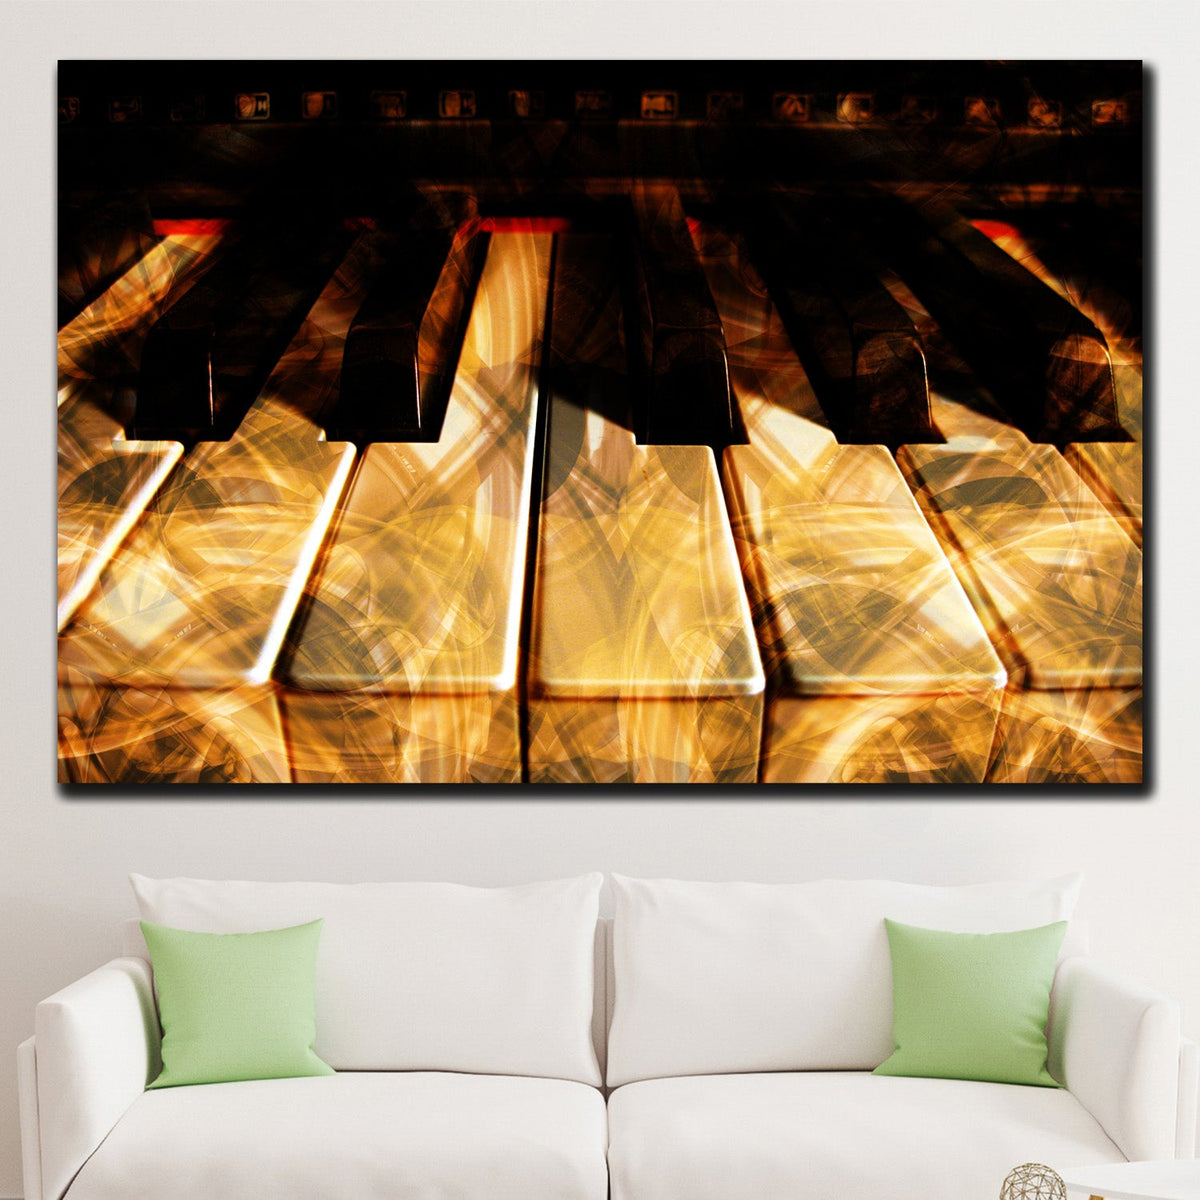 https://cdn.shopify.com/s/files/1/0387/9986/8044/products/ElectricPianoKeysCanvasArtprintStretched-2.jpg